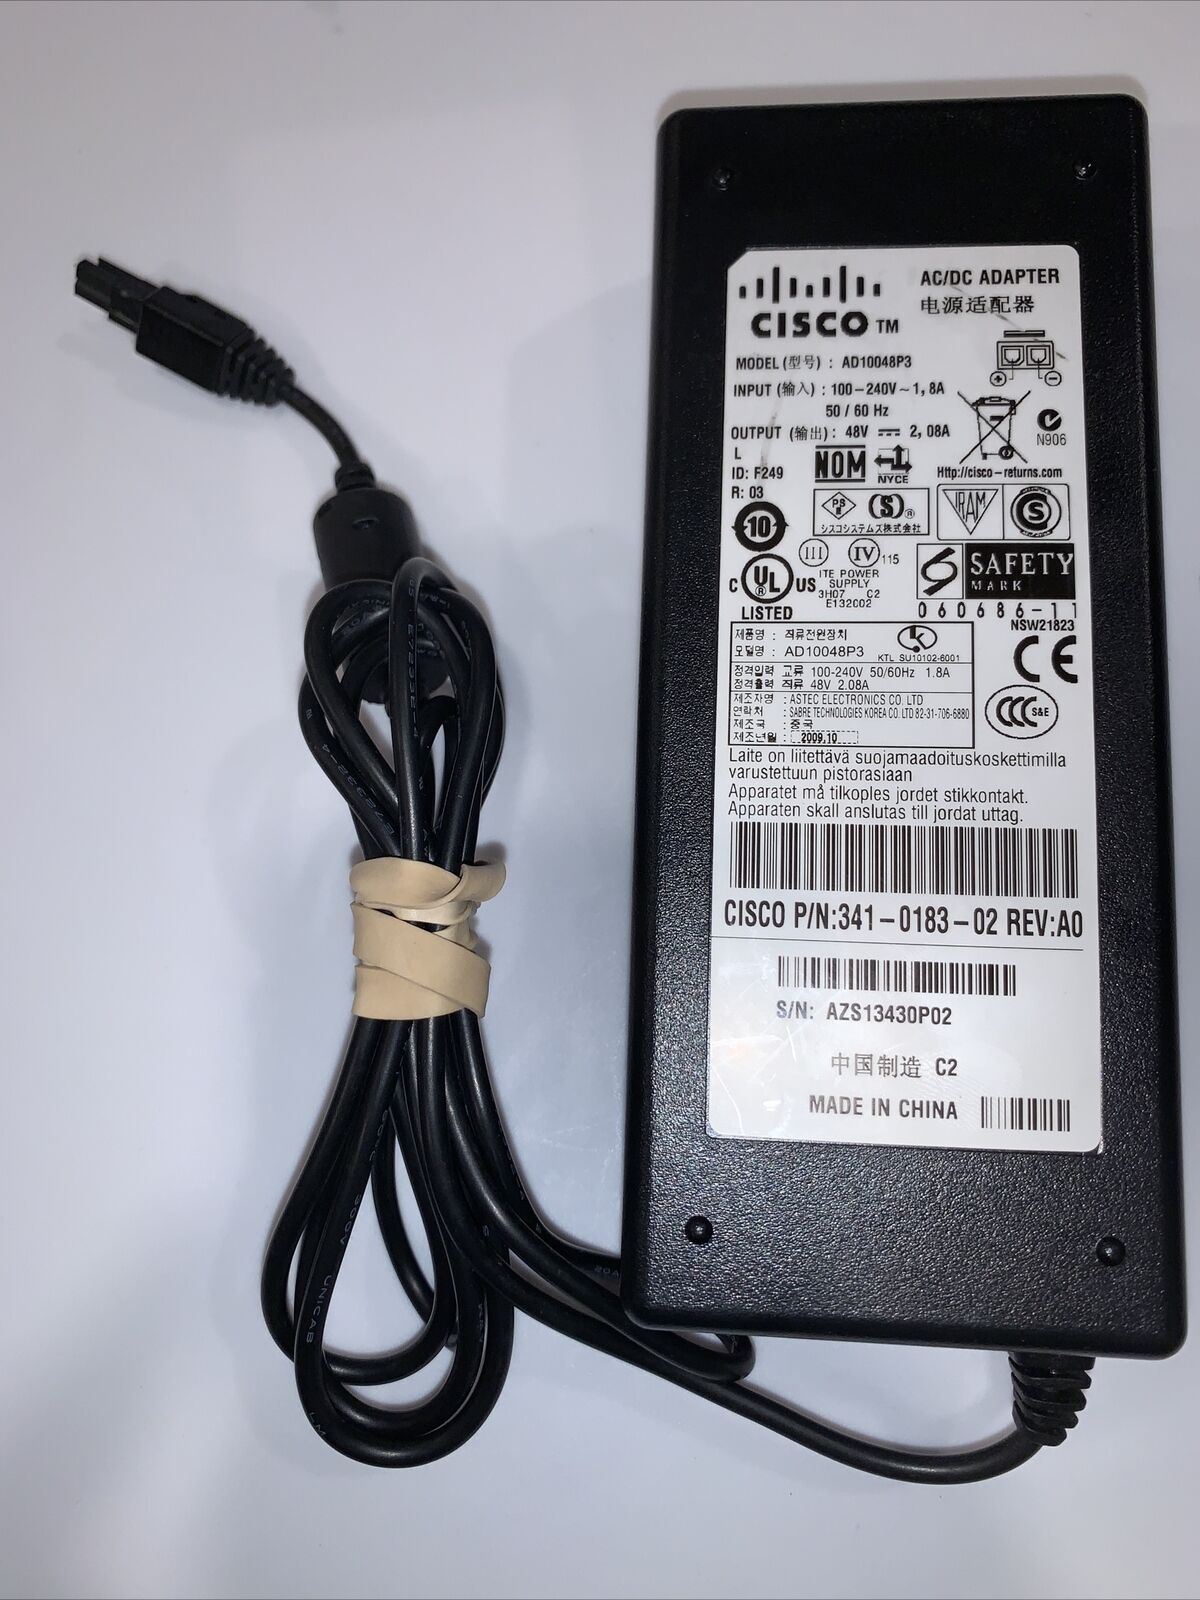 *Brand NEW* OEM CISCO 48V 2.08A 2-PIN POWER SUPPLY ADAPTER 341-0183-02 AD10048P3 TESTED-WORK